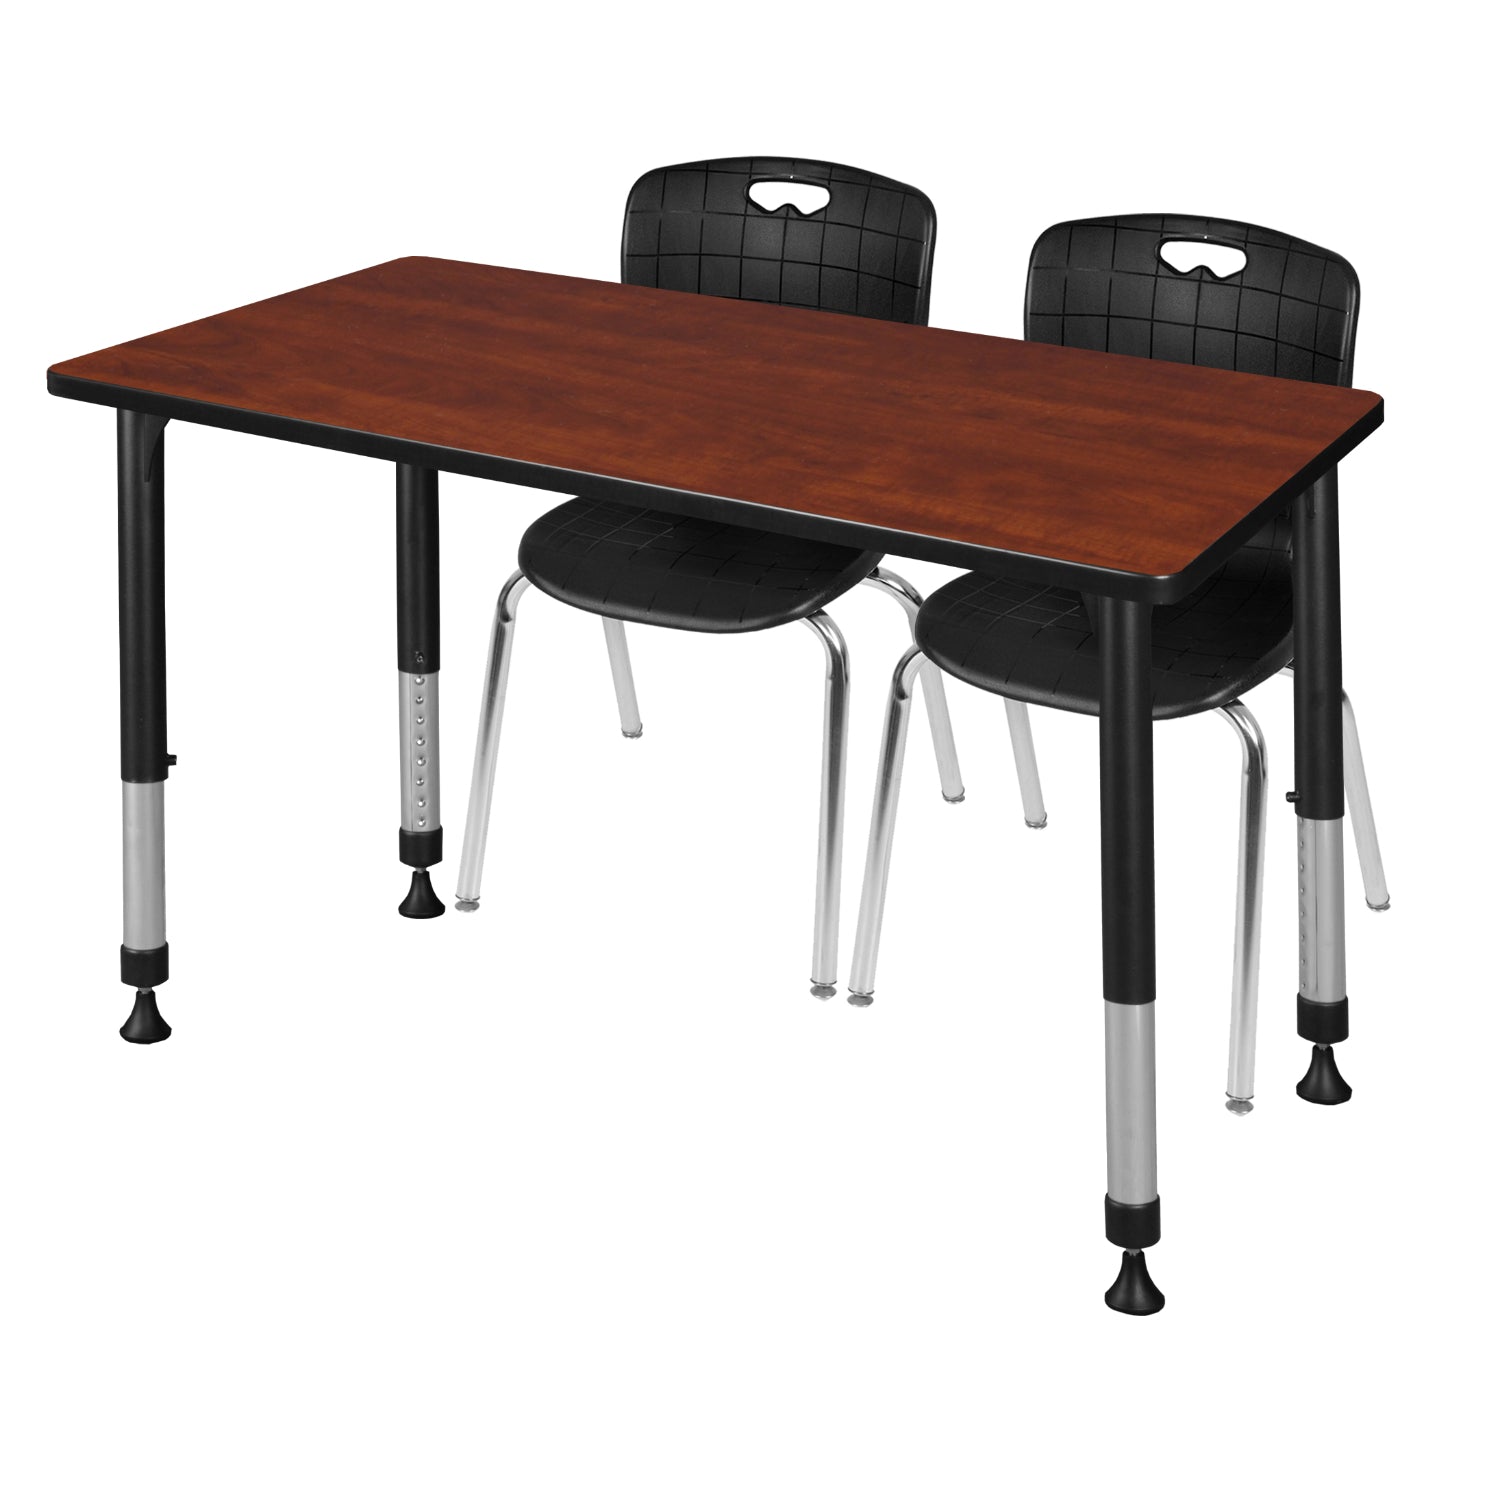 Kee Classroom Table and Chair Package, Kee 48" x 24" Rectangular Adjustable Height Table with 2 Andy 18" Stack Chairs